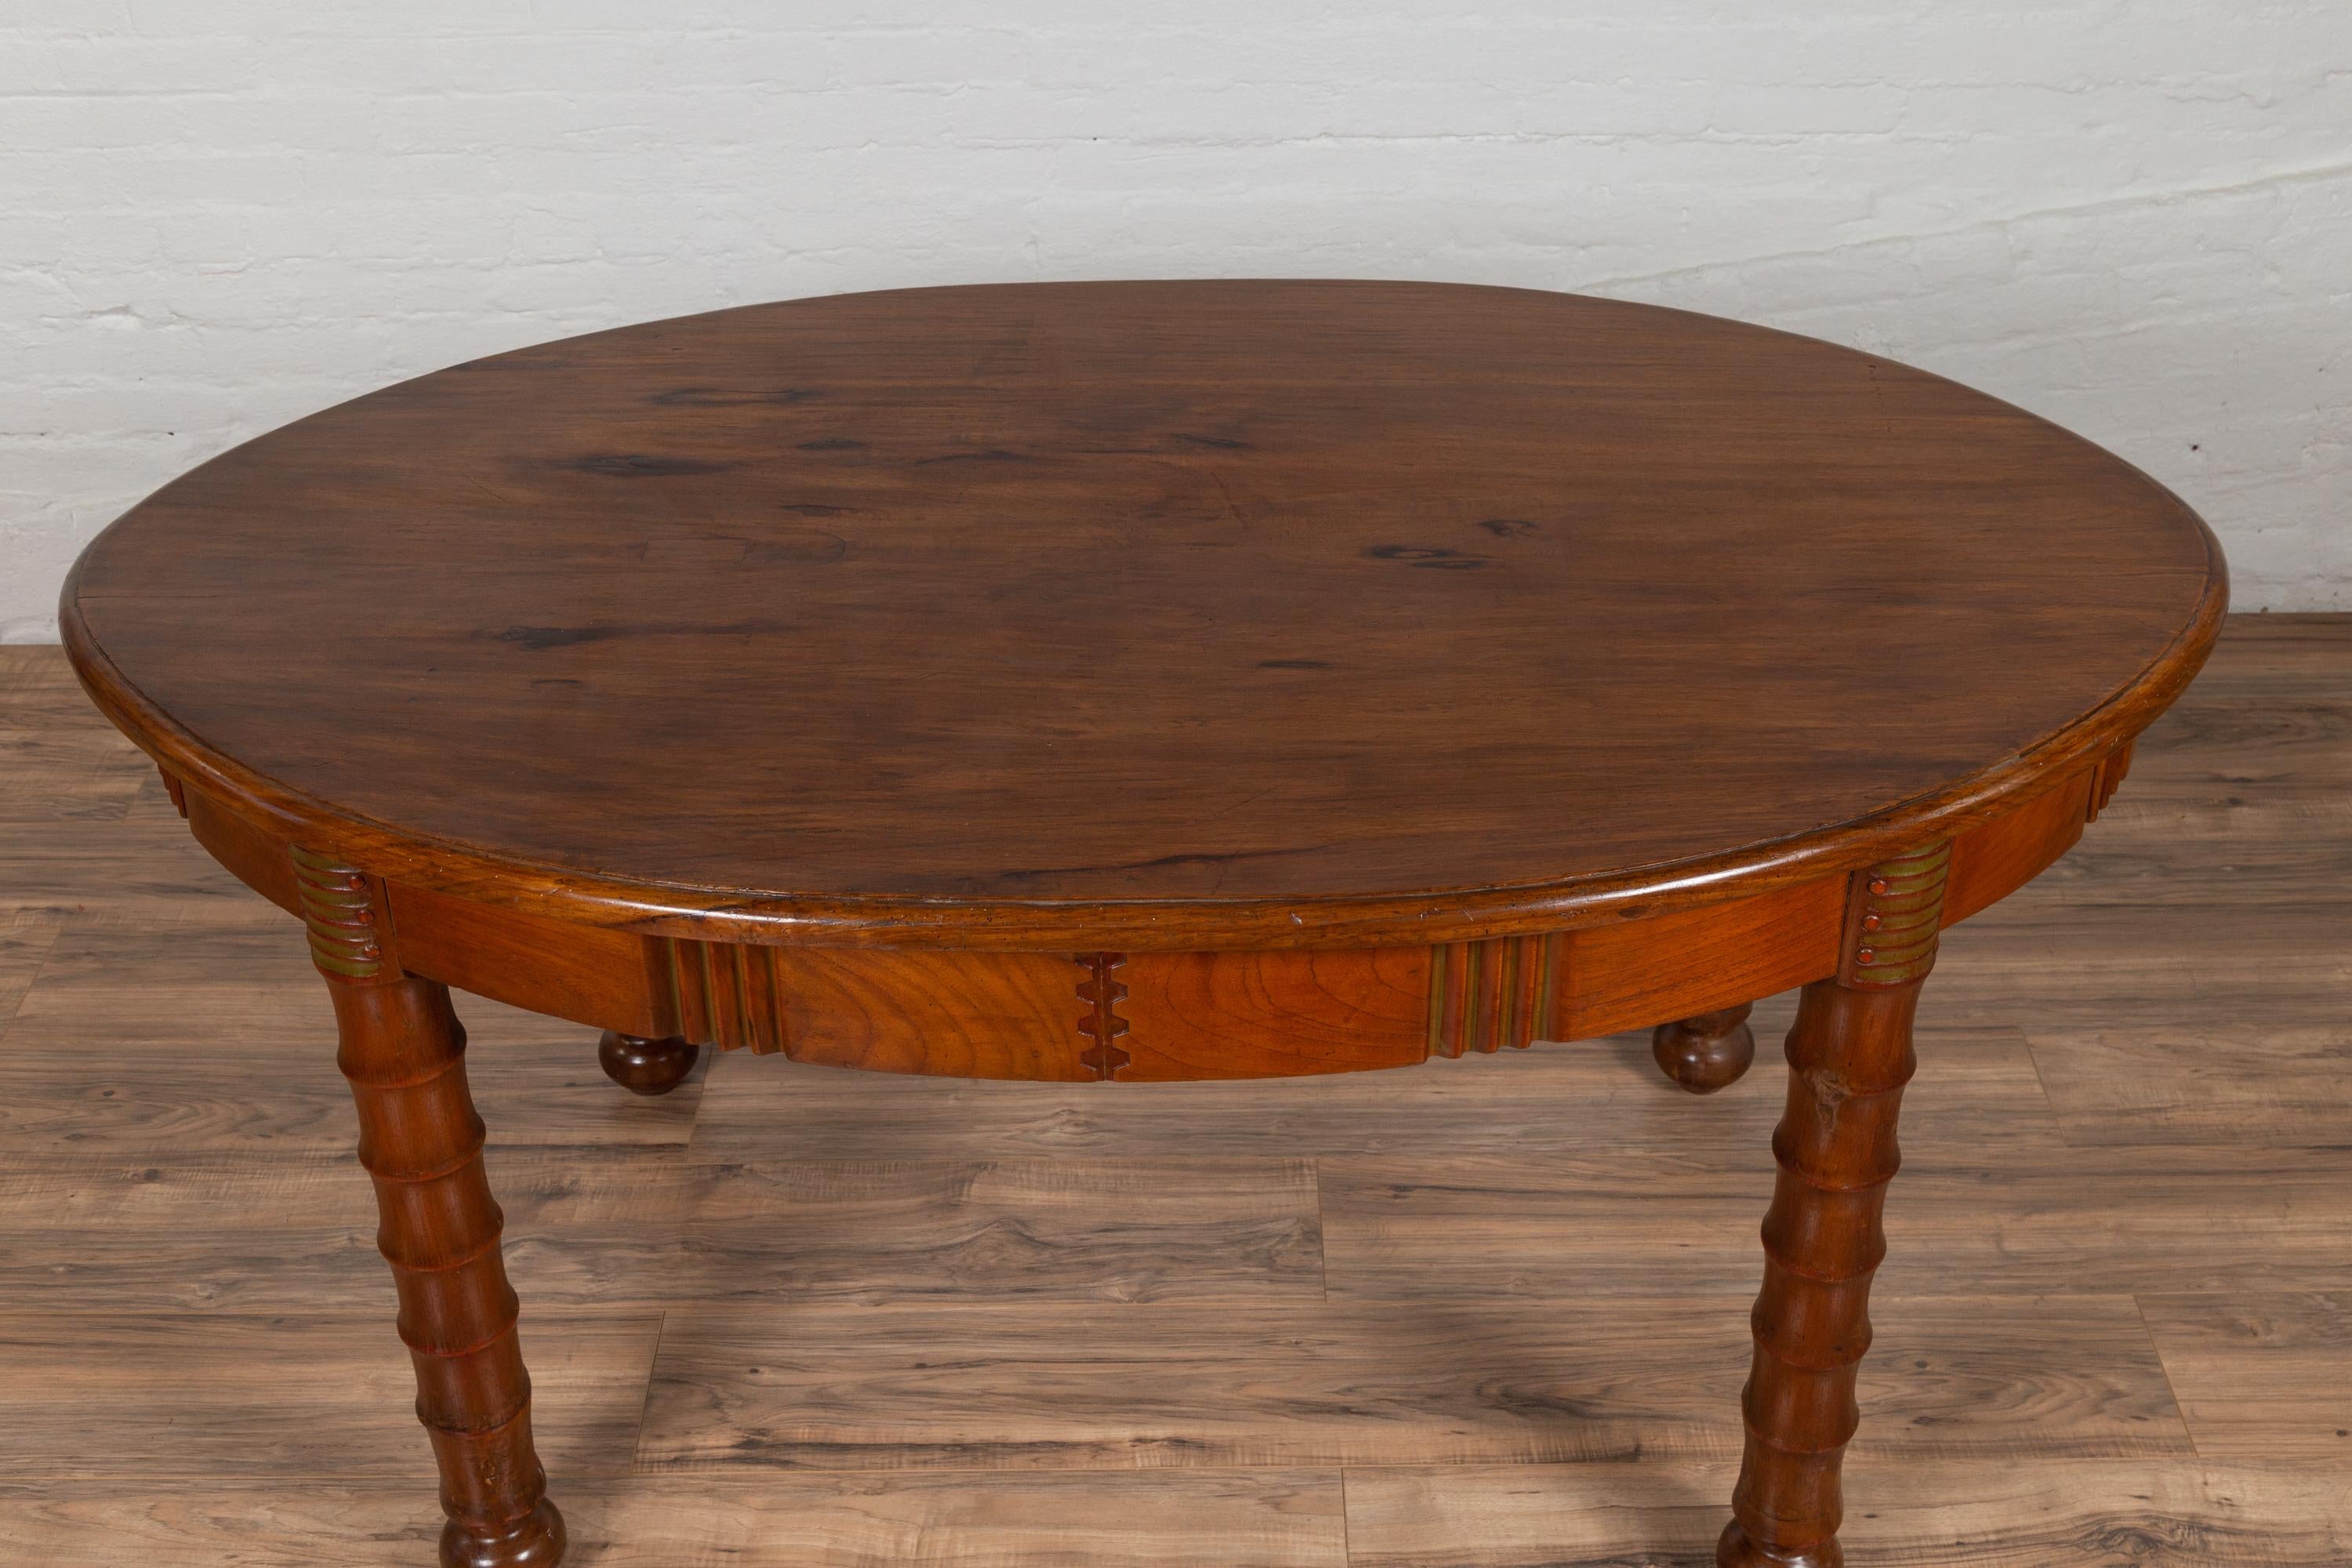 Antique Oval Dining Room Table from Indonesia with Spindle Legs and Warm Patina For Sale 1